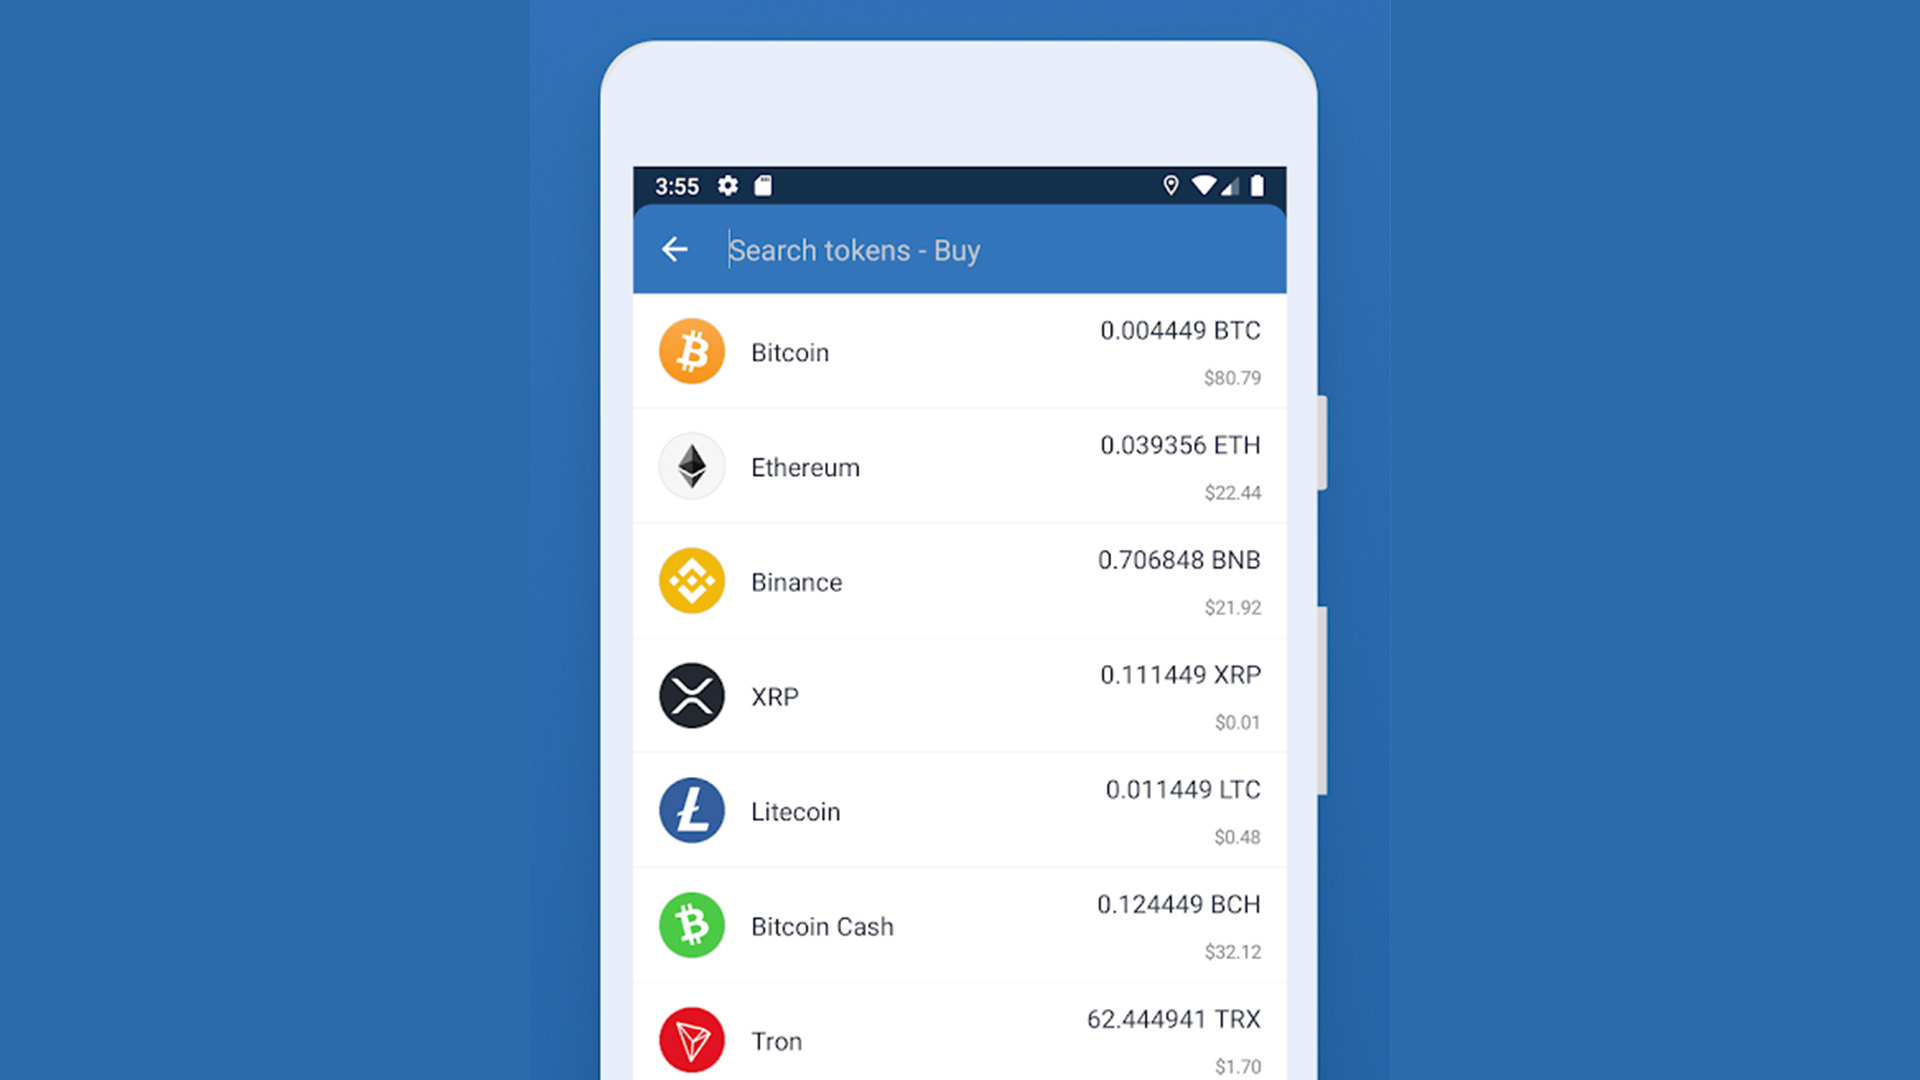 Ltc local wallet is zcash based on bitcoin